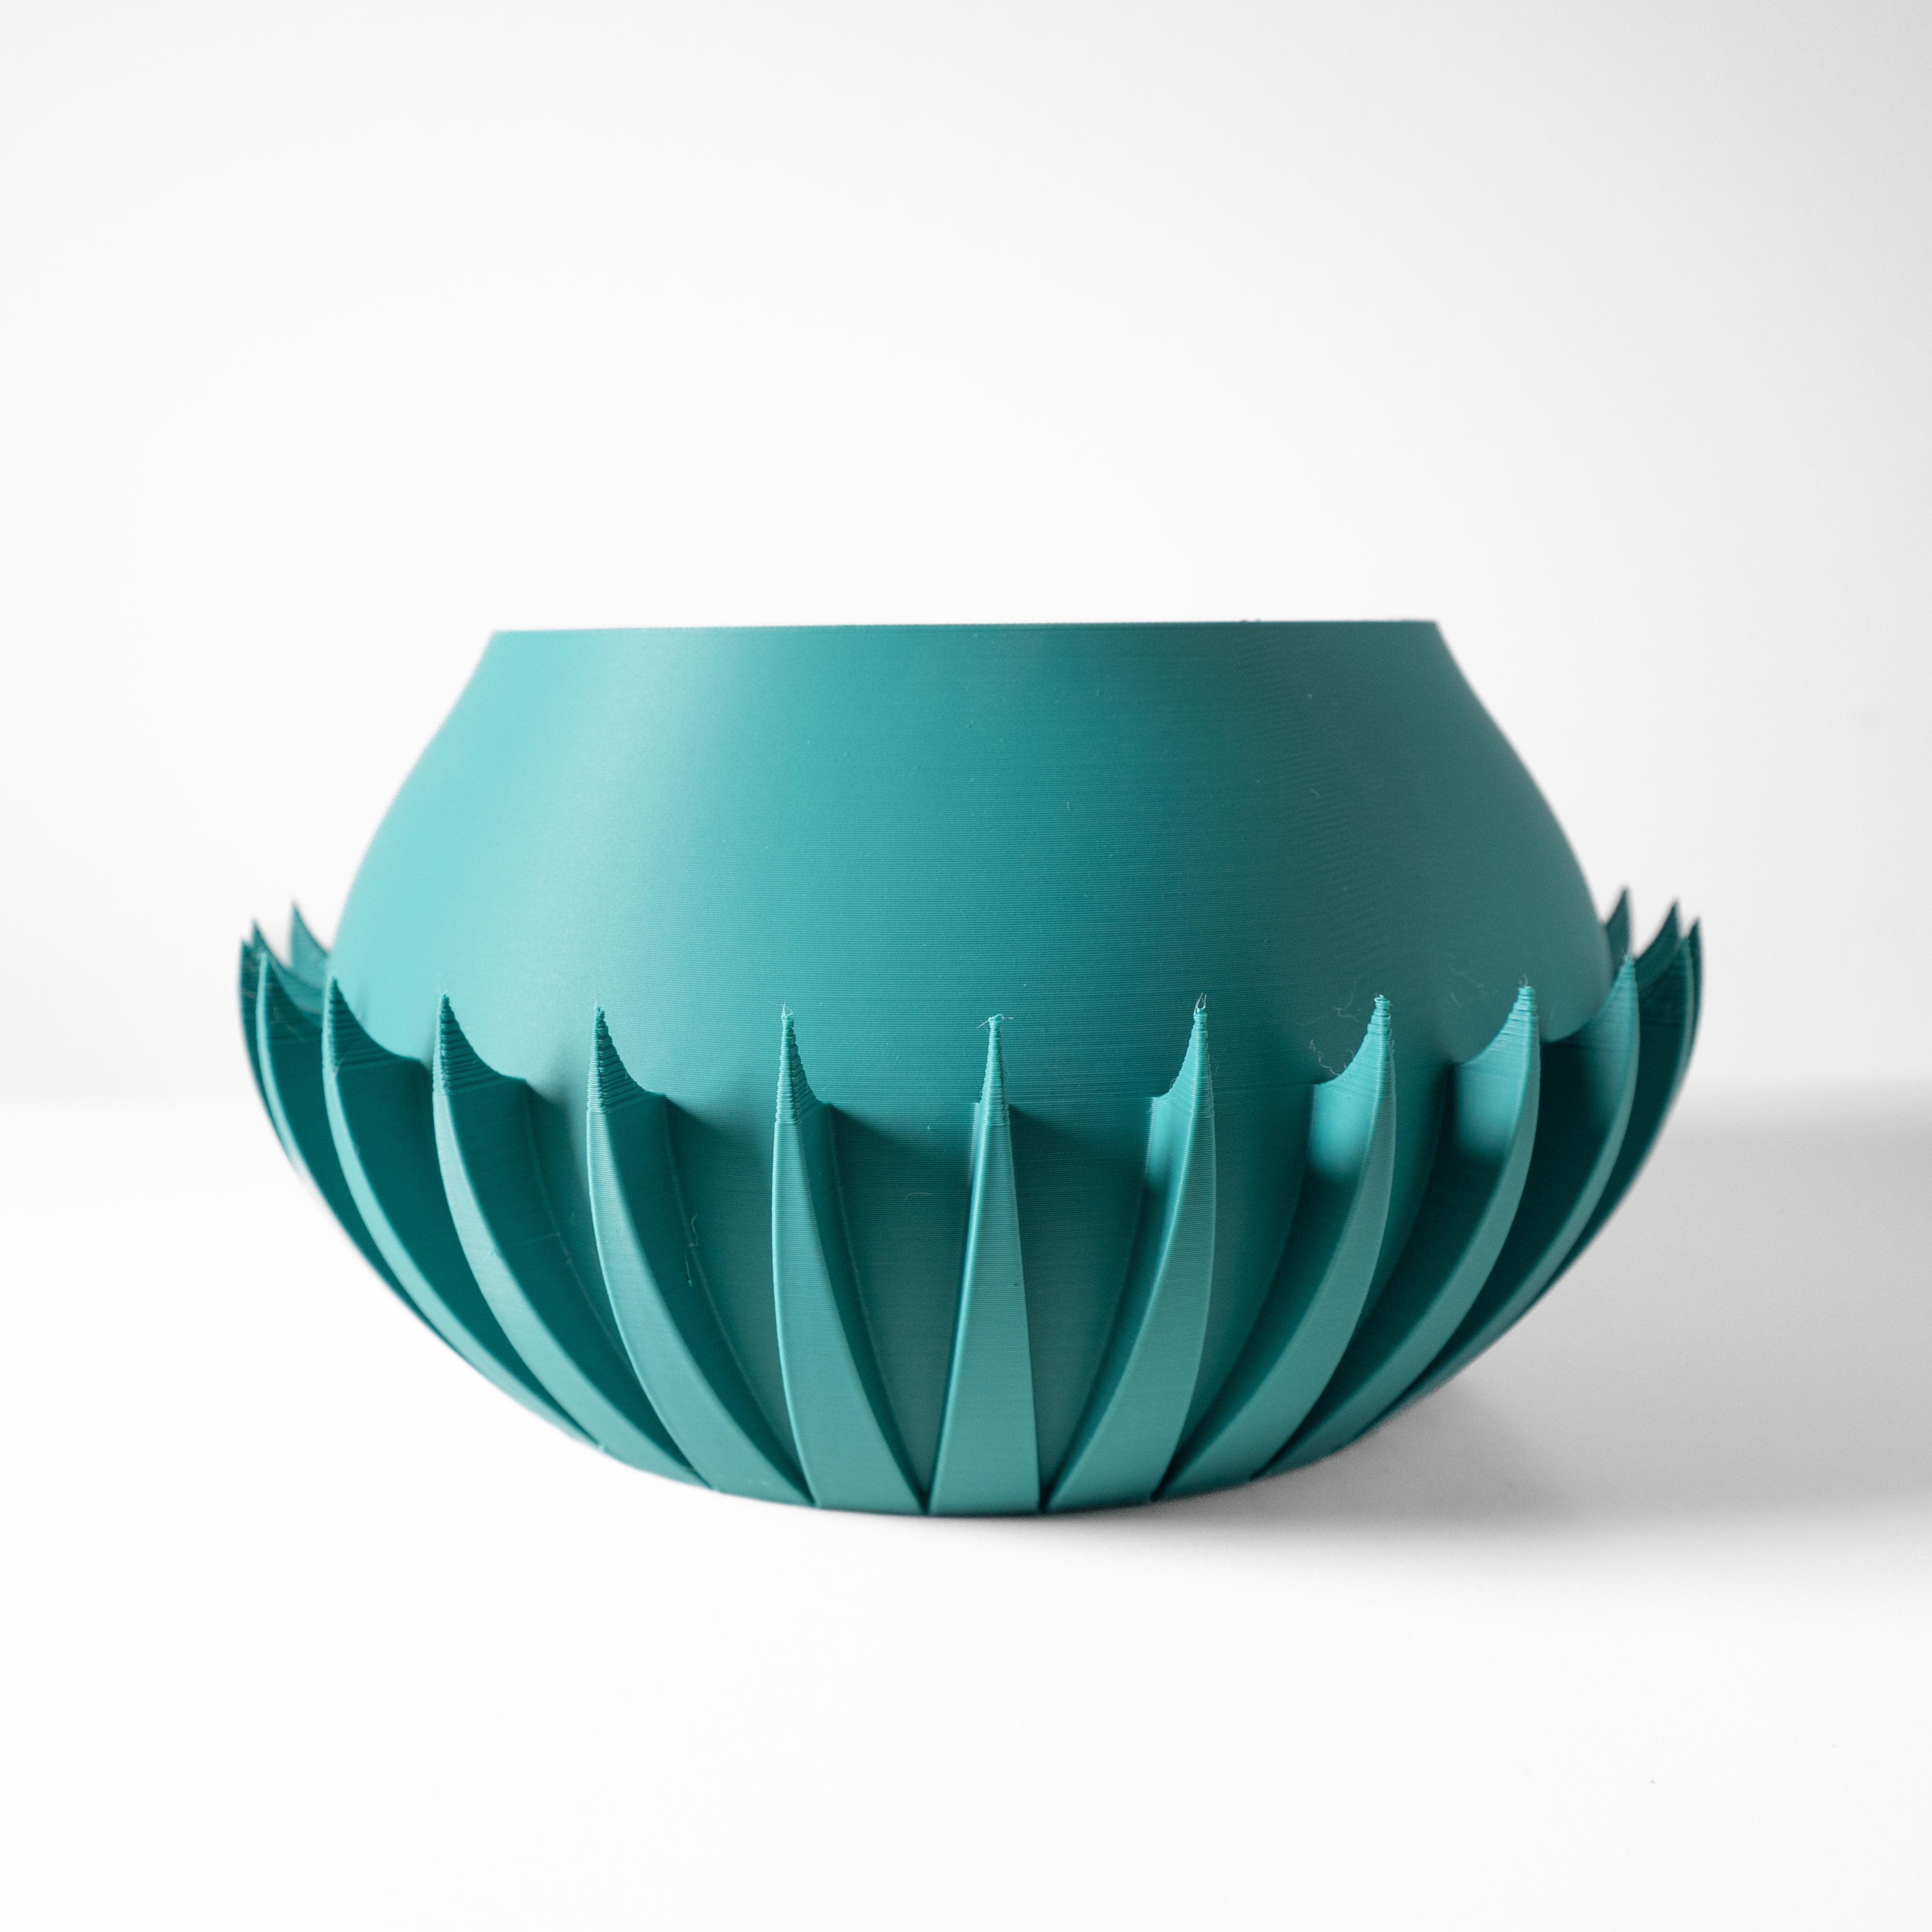 The Lavis Planter Pot with Drainage Tray & Stand: Modern and Unique Home Decor for Plants 3d model